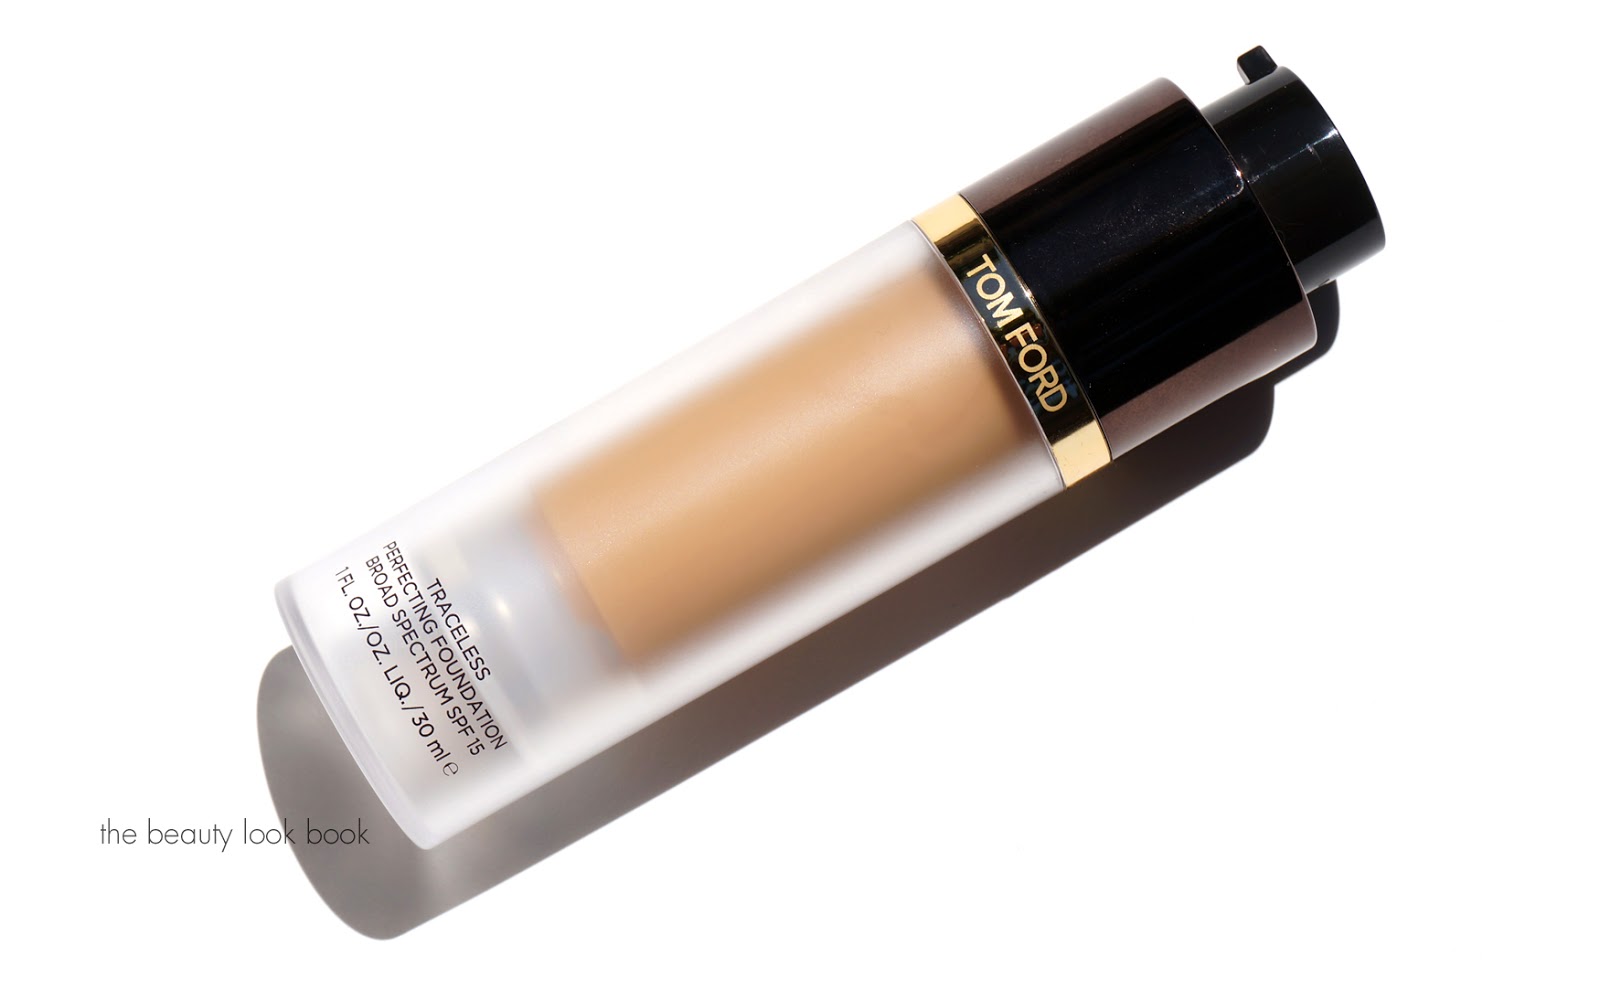 Tom Ford Traceless Perfecting Foundation 4 Review - The Beauty Look Book